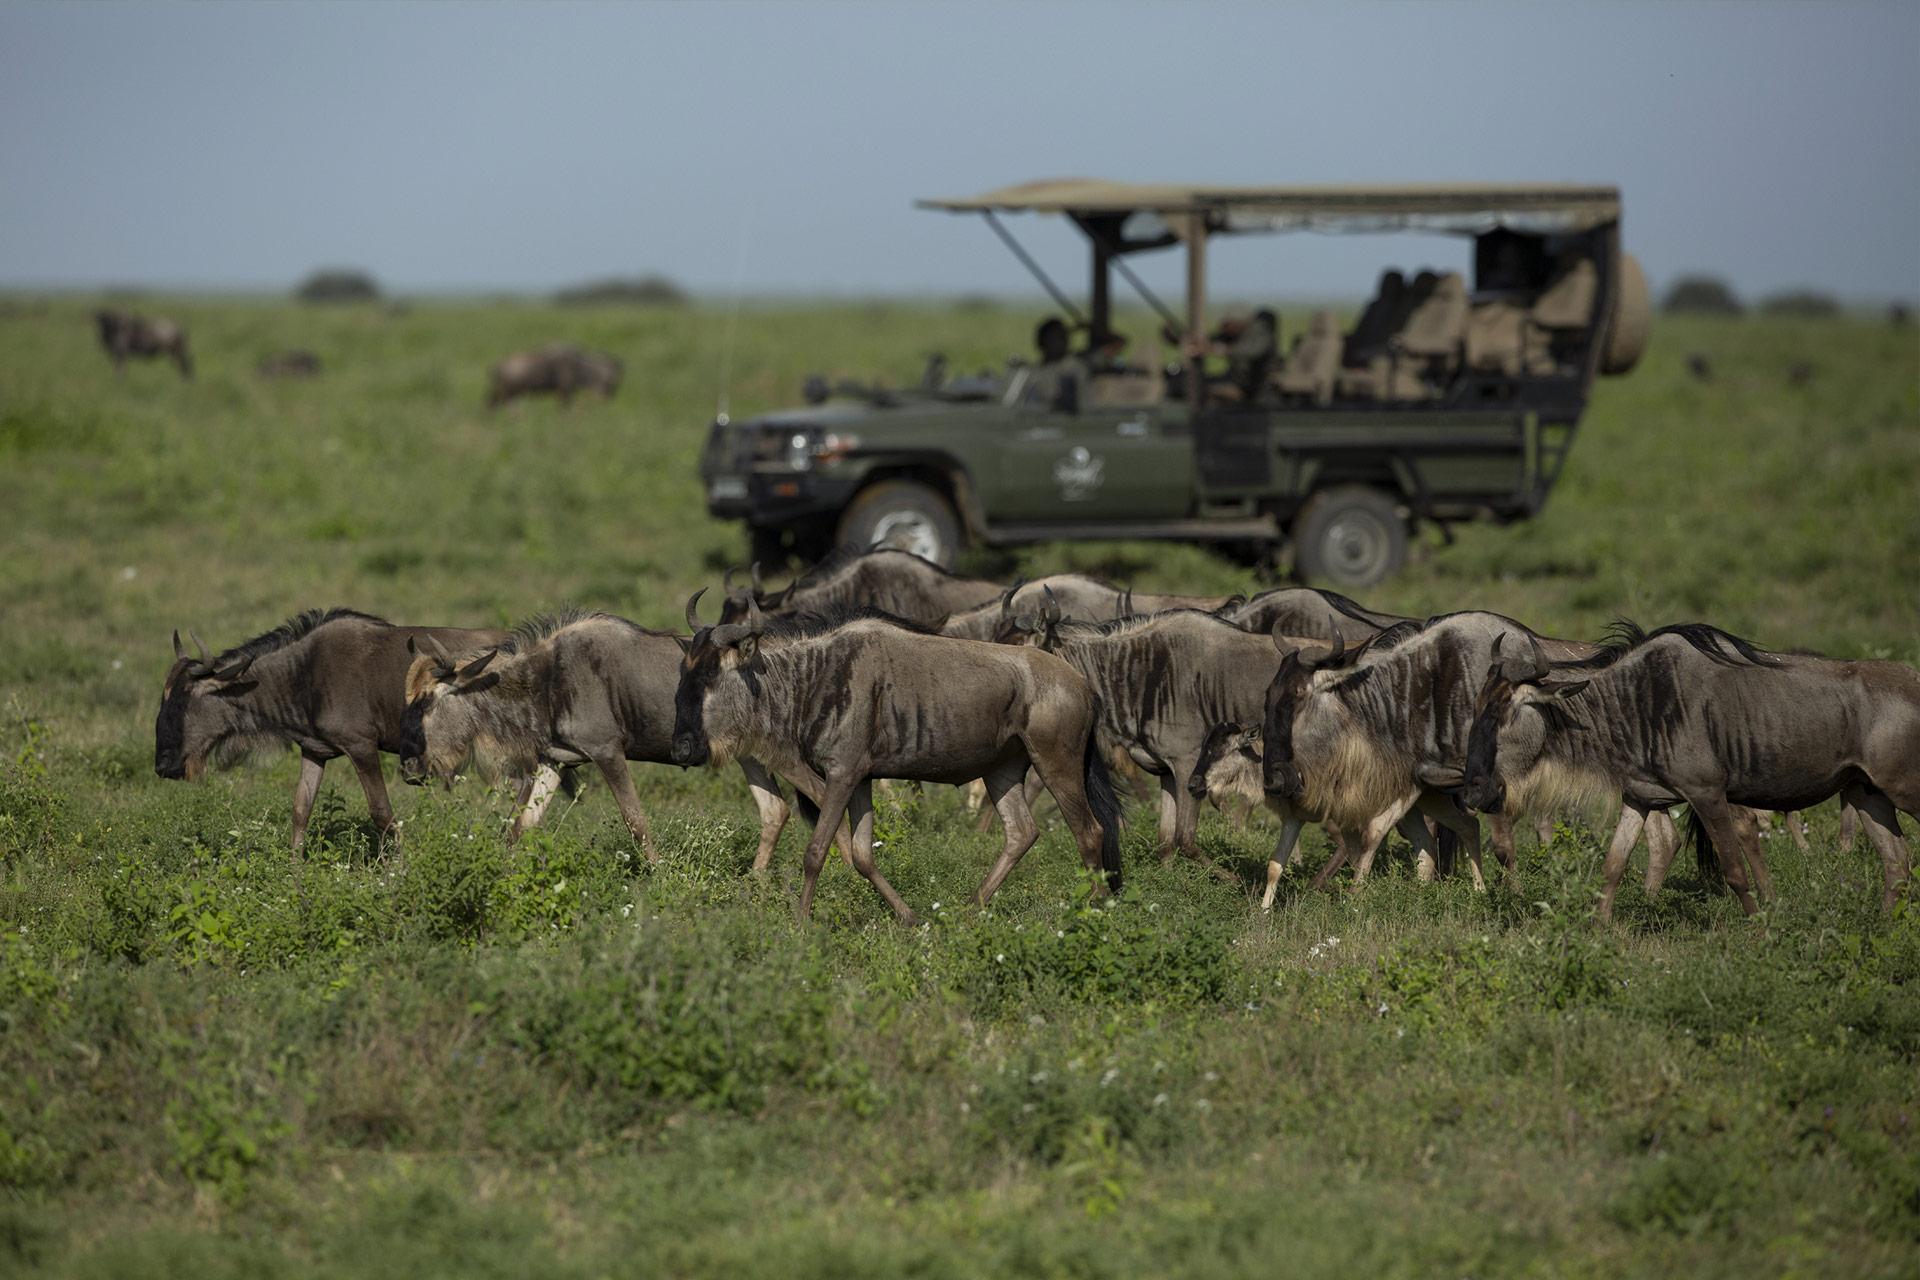 The rains have brought the thousands of migrating wildebeest, or ‘nyumbu’ in Swahili, down to Ndutu. 